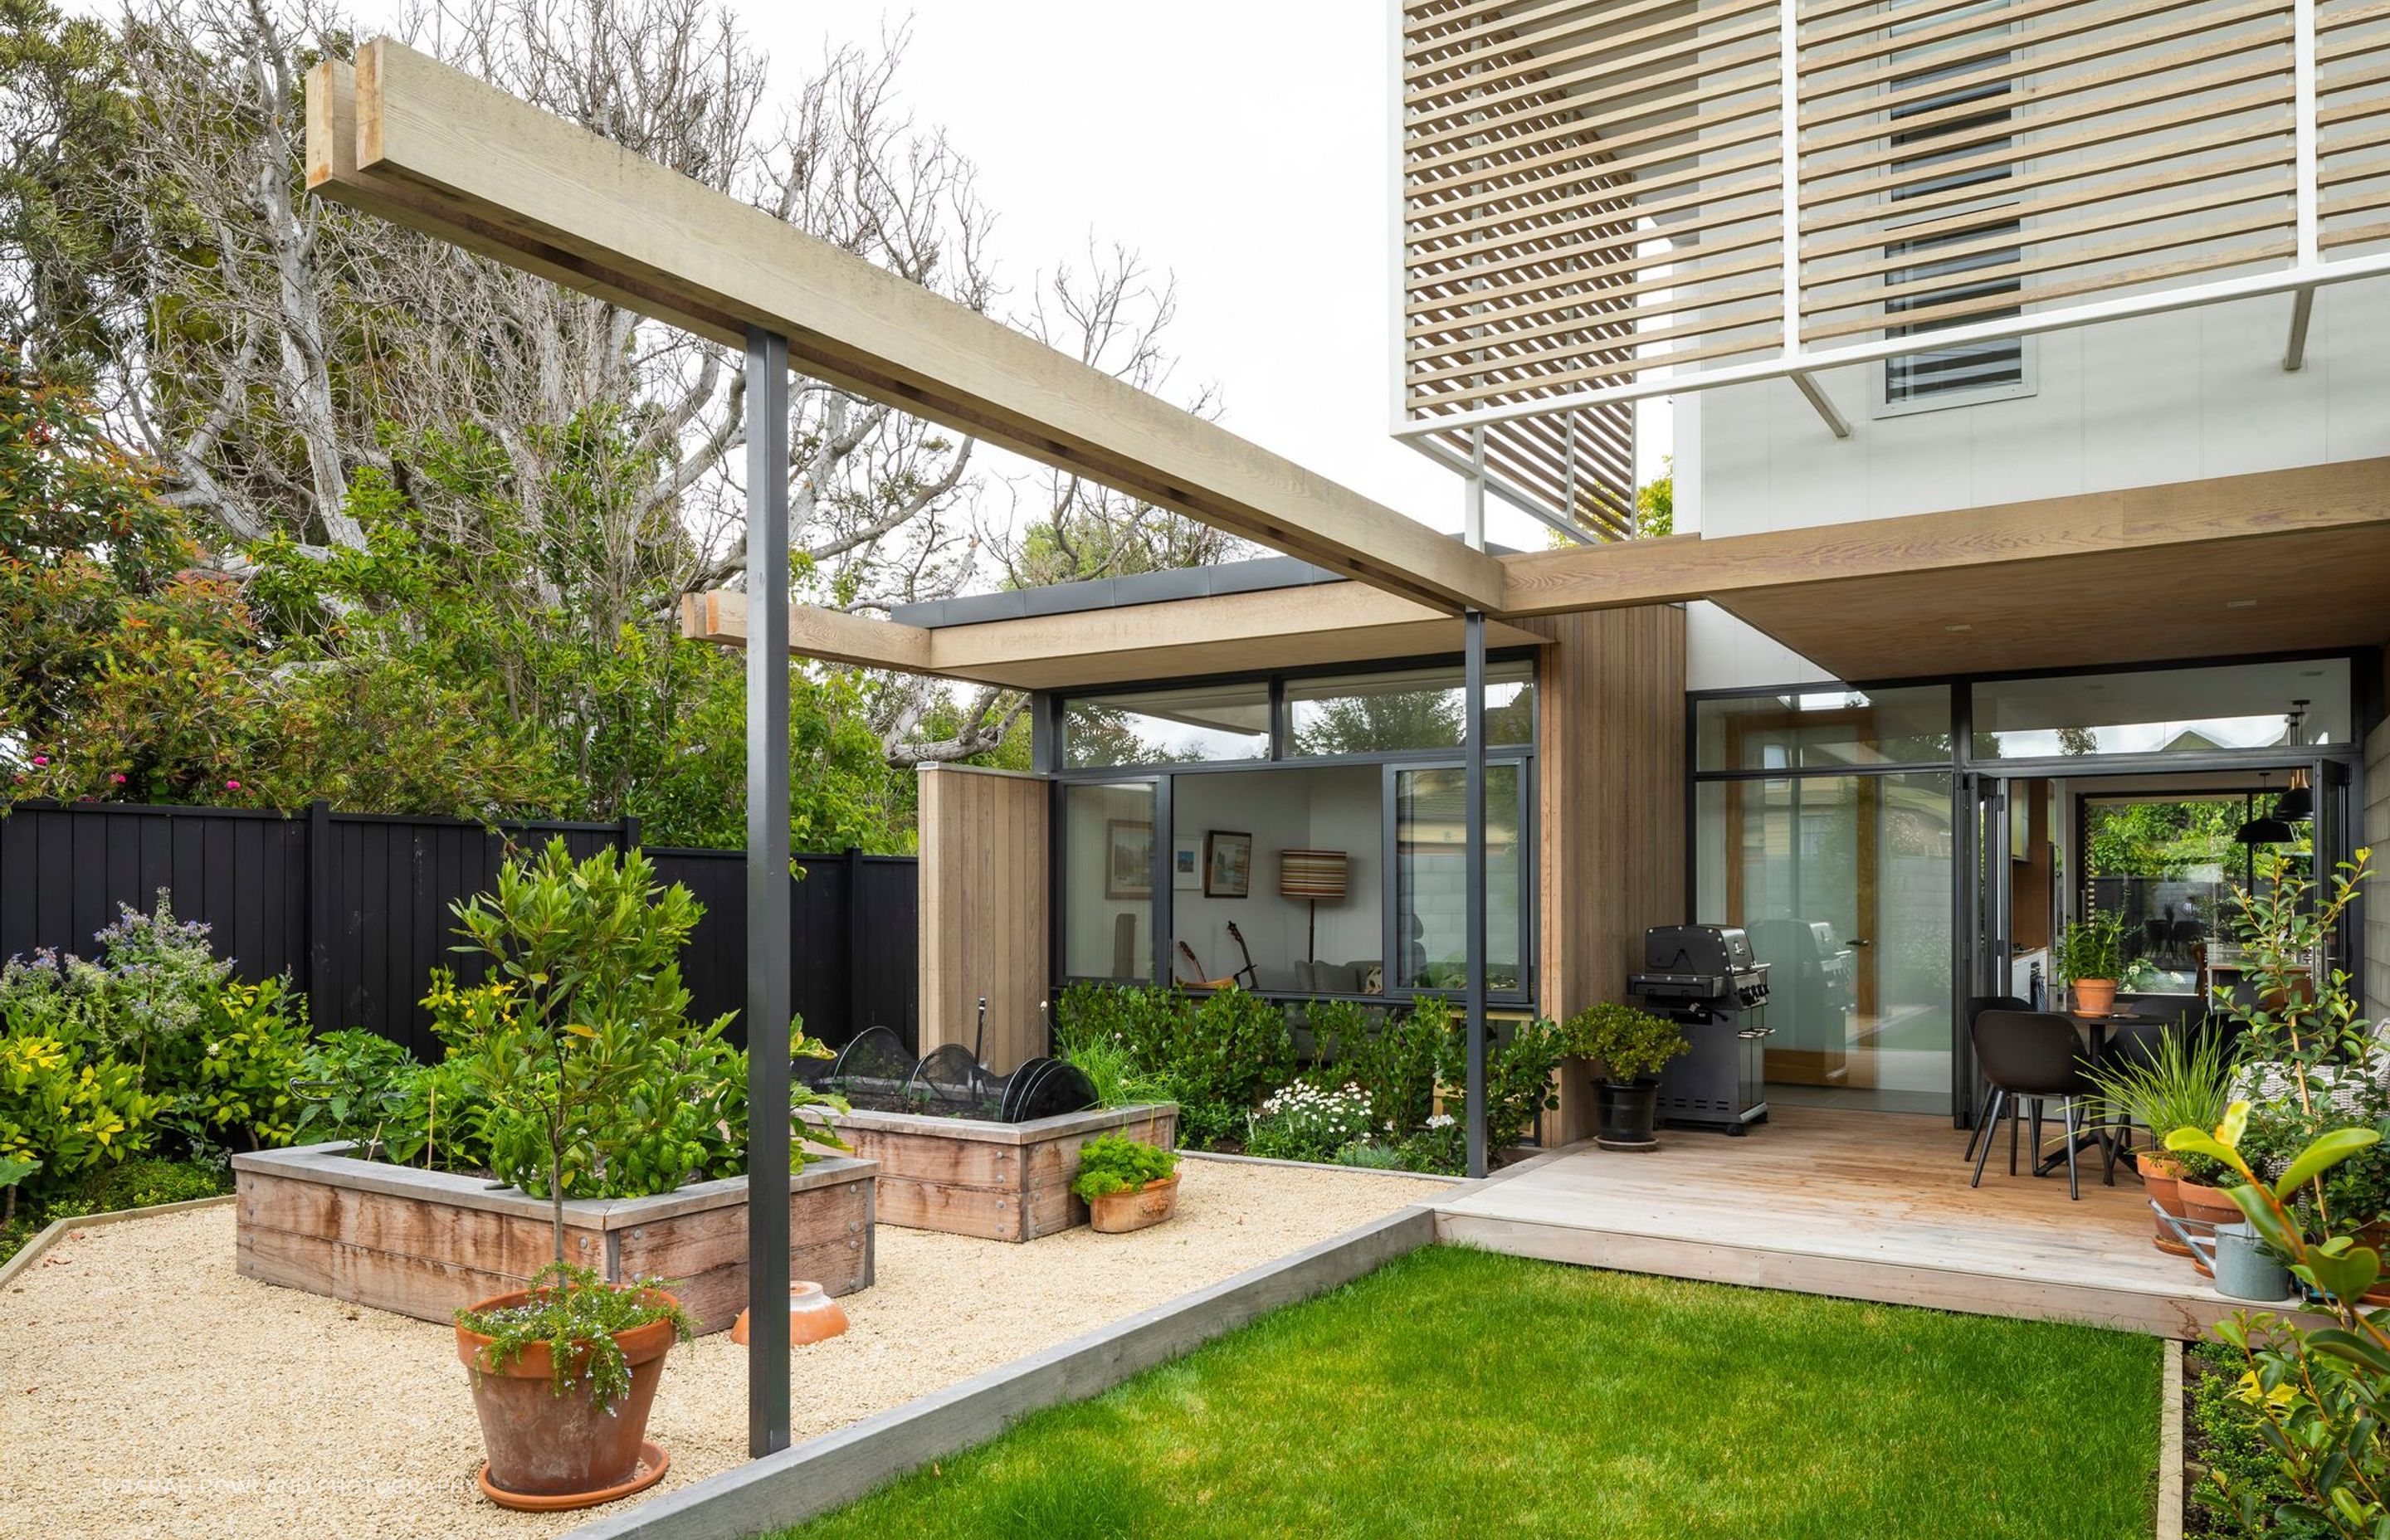 The connection between indoors and outdoors has been visually reinforced through the use of colonnaded pergolas that extend out into the environment.